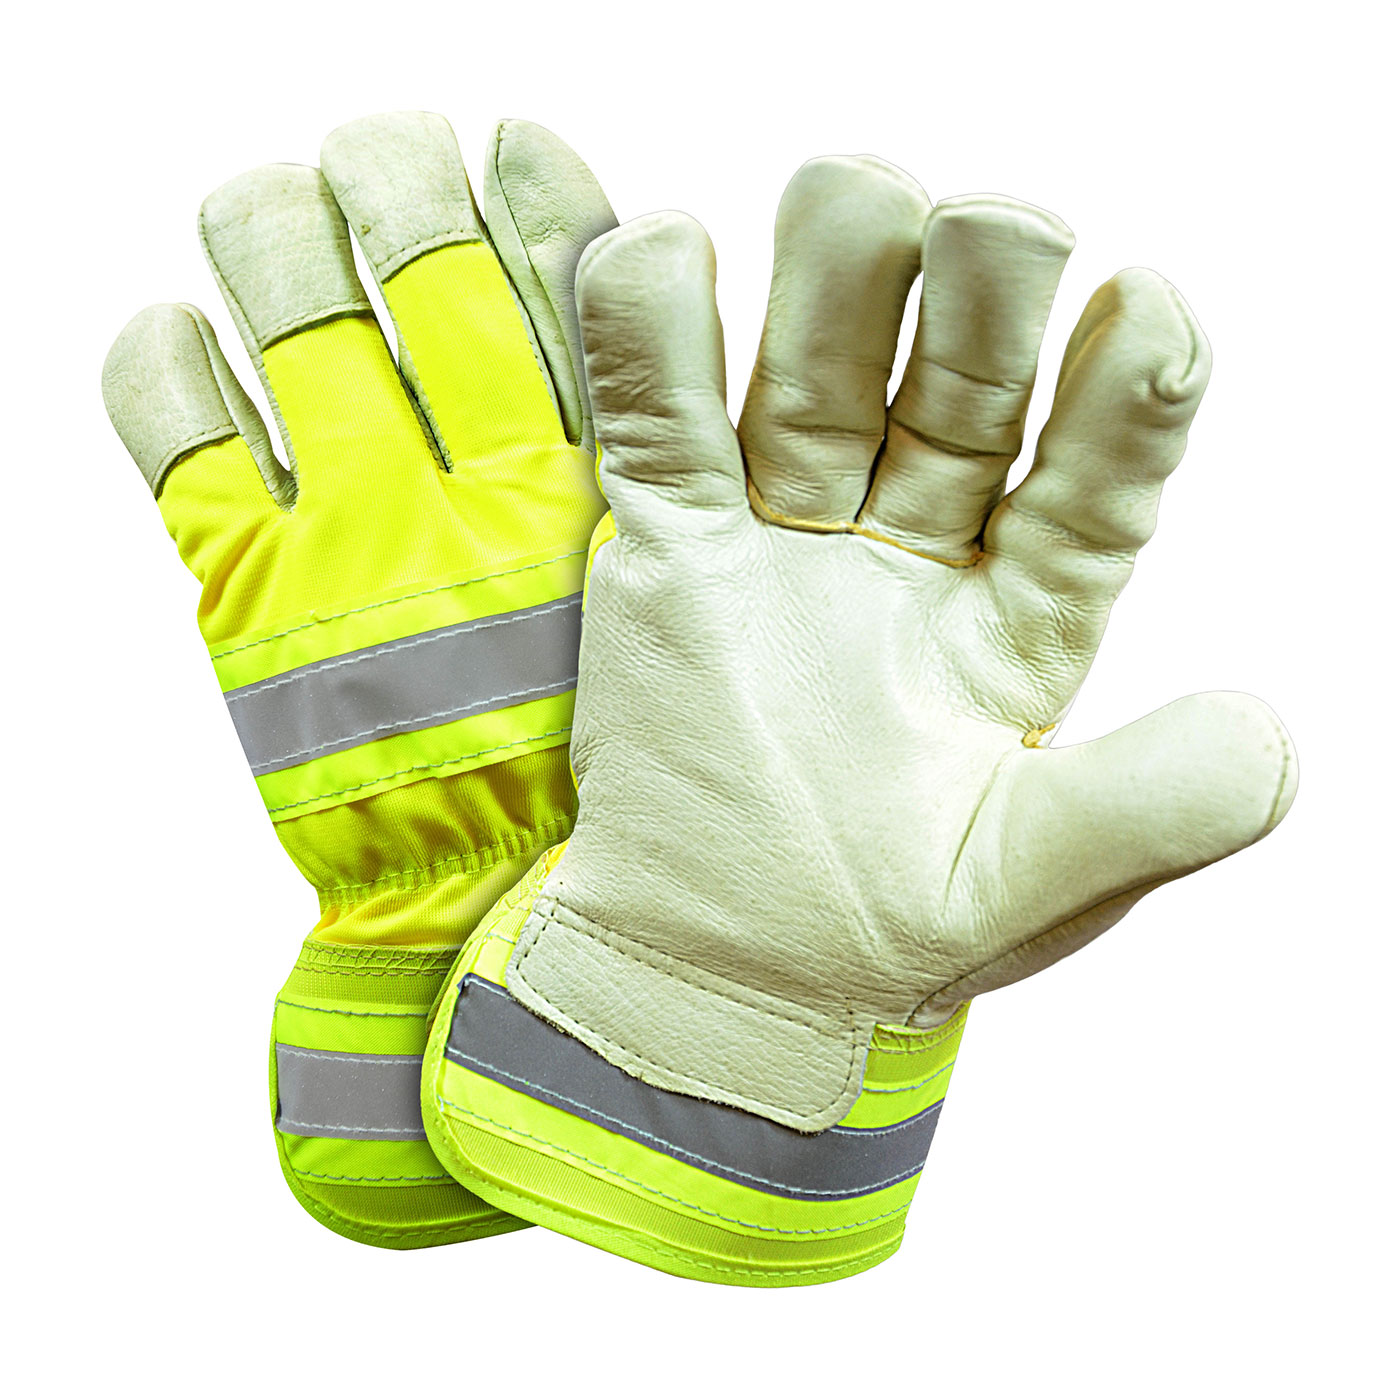 #HVY5555 PIP® West Chester Posi-Therm Top Grain Pigskin Leather Palm Glove with Rubberized Safety Cuffs, Hi-Vis Nylon Backs and Retro Reflective Stripes